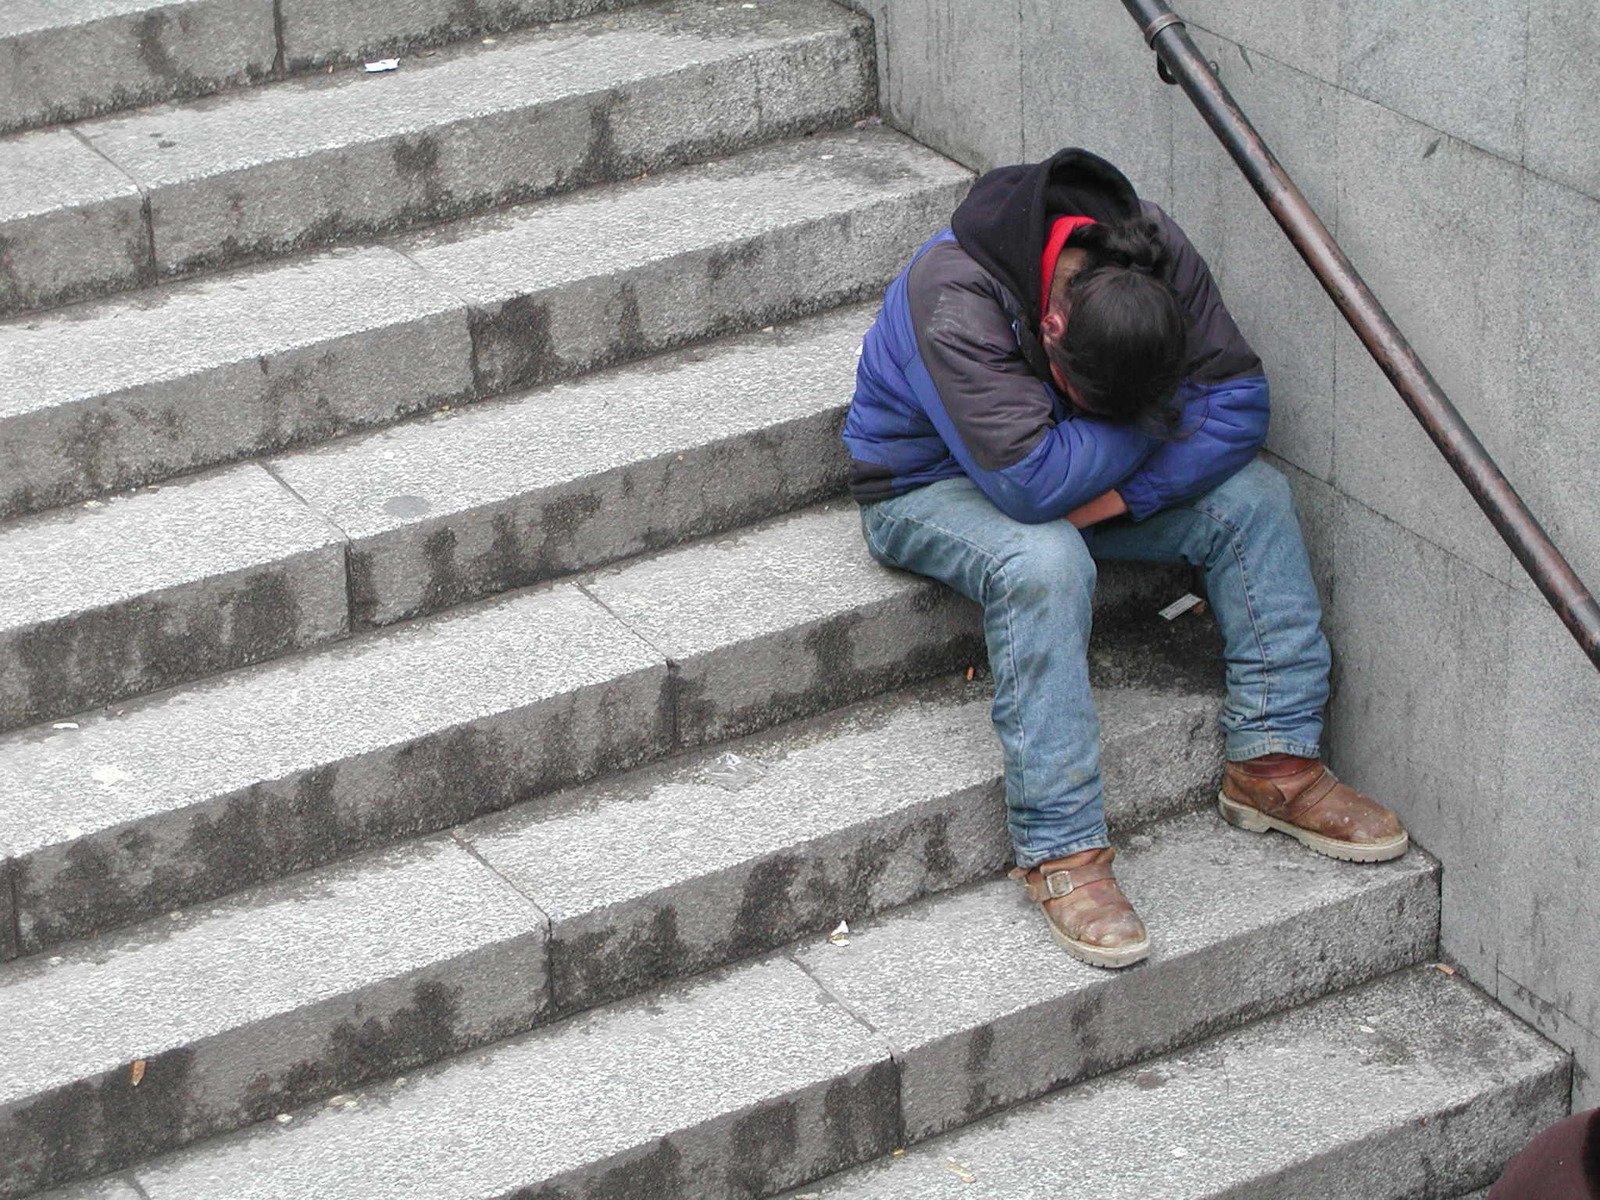 Rough Sleeping and Homelessness in Wales - Statistics, Figures and Advice - The Wallich Charity